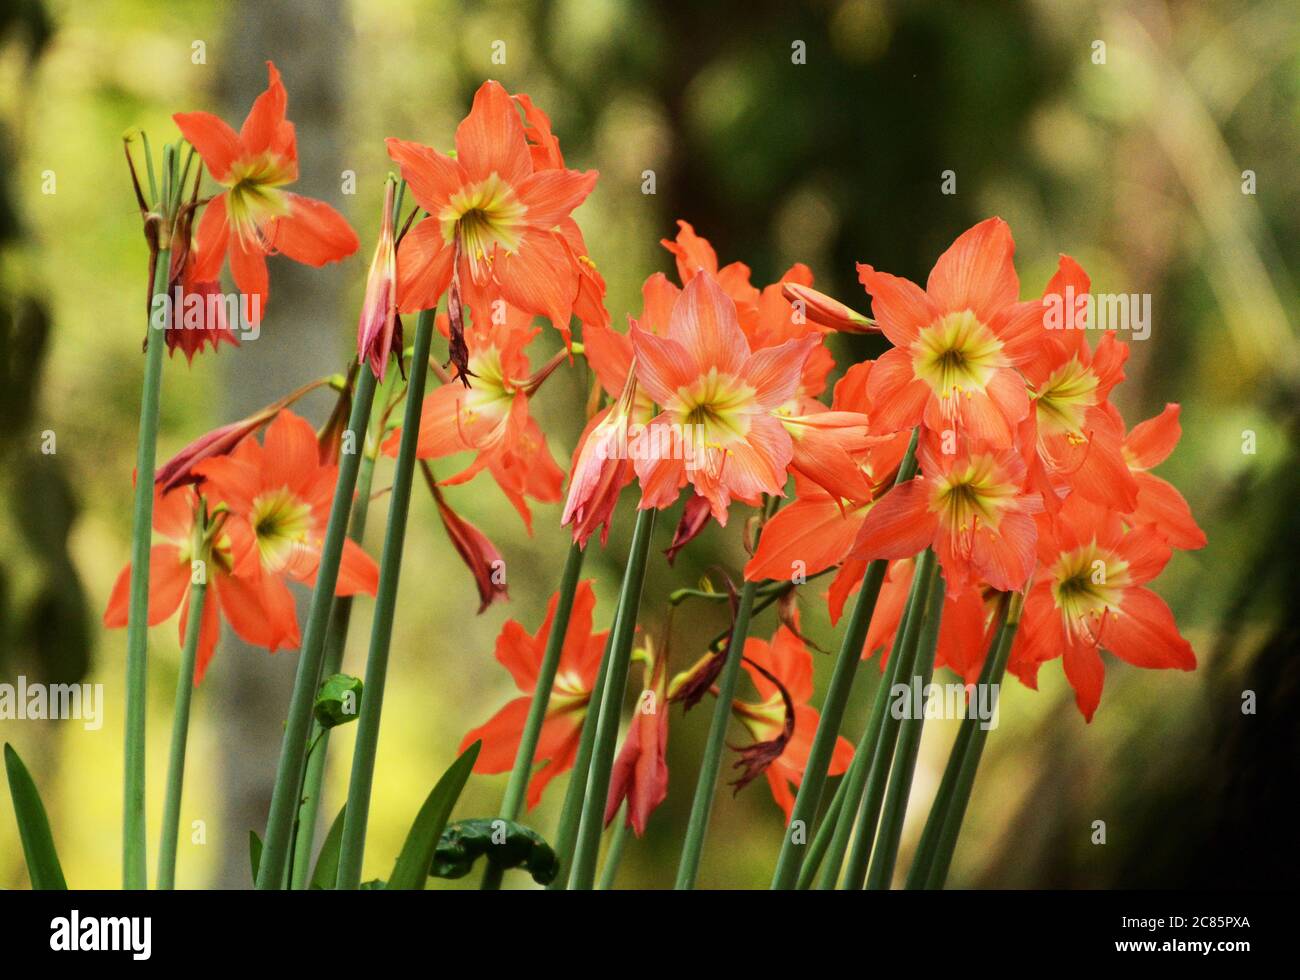 Hippeastrum puniceum or Barbados Lily or Red lily Stock Photo